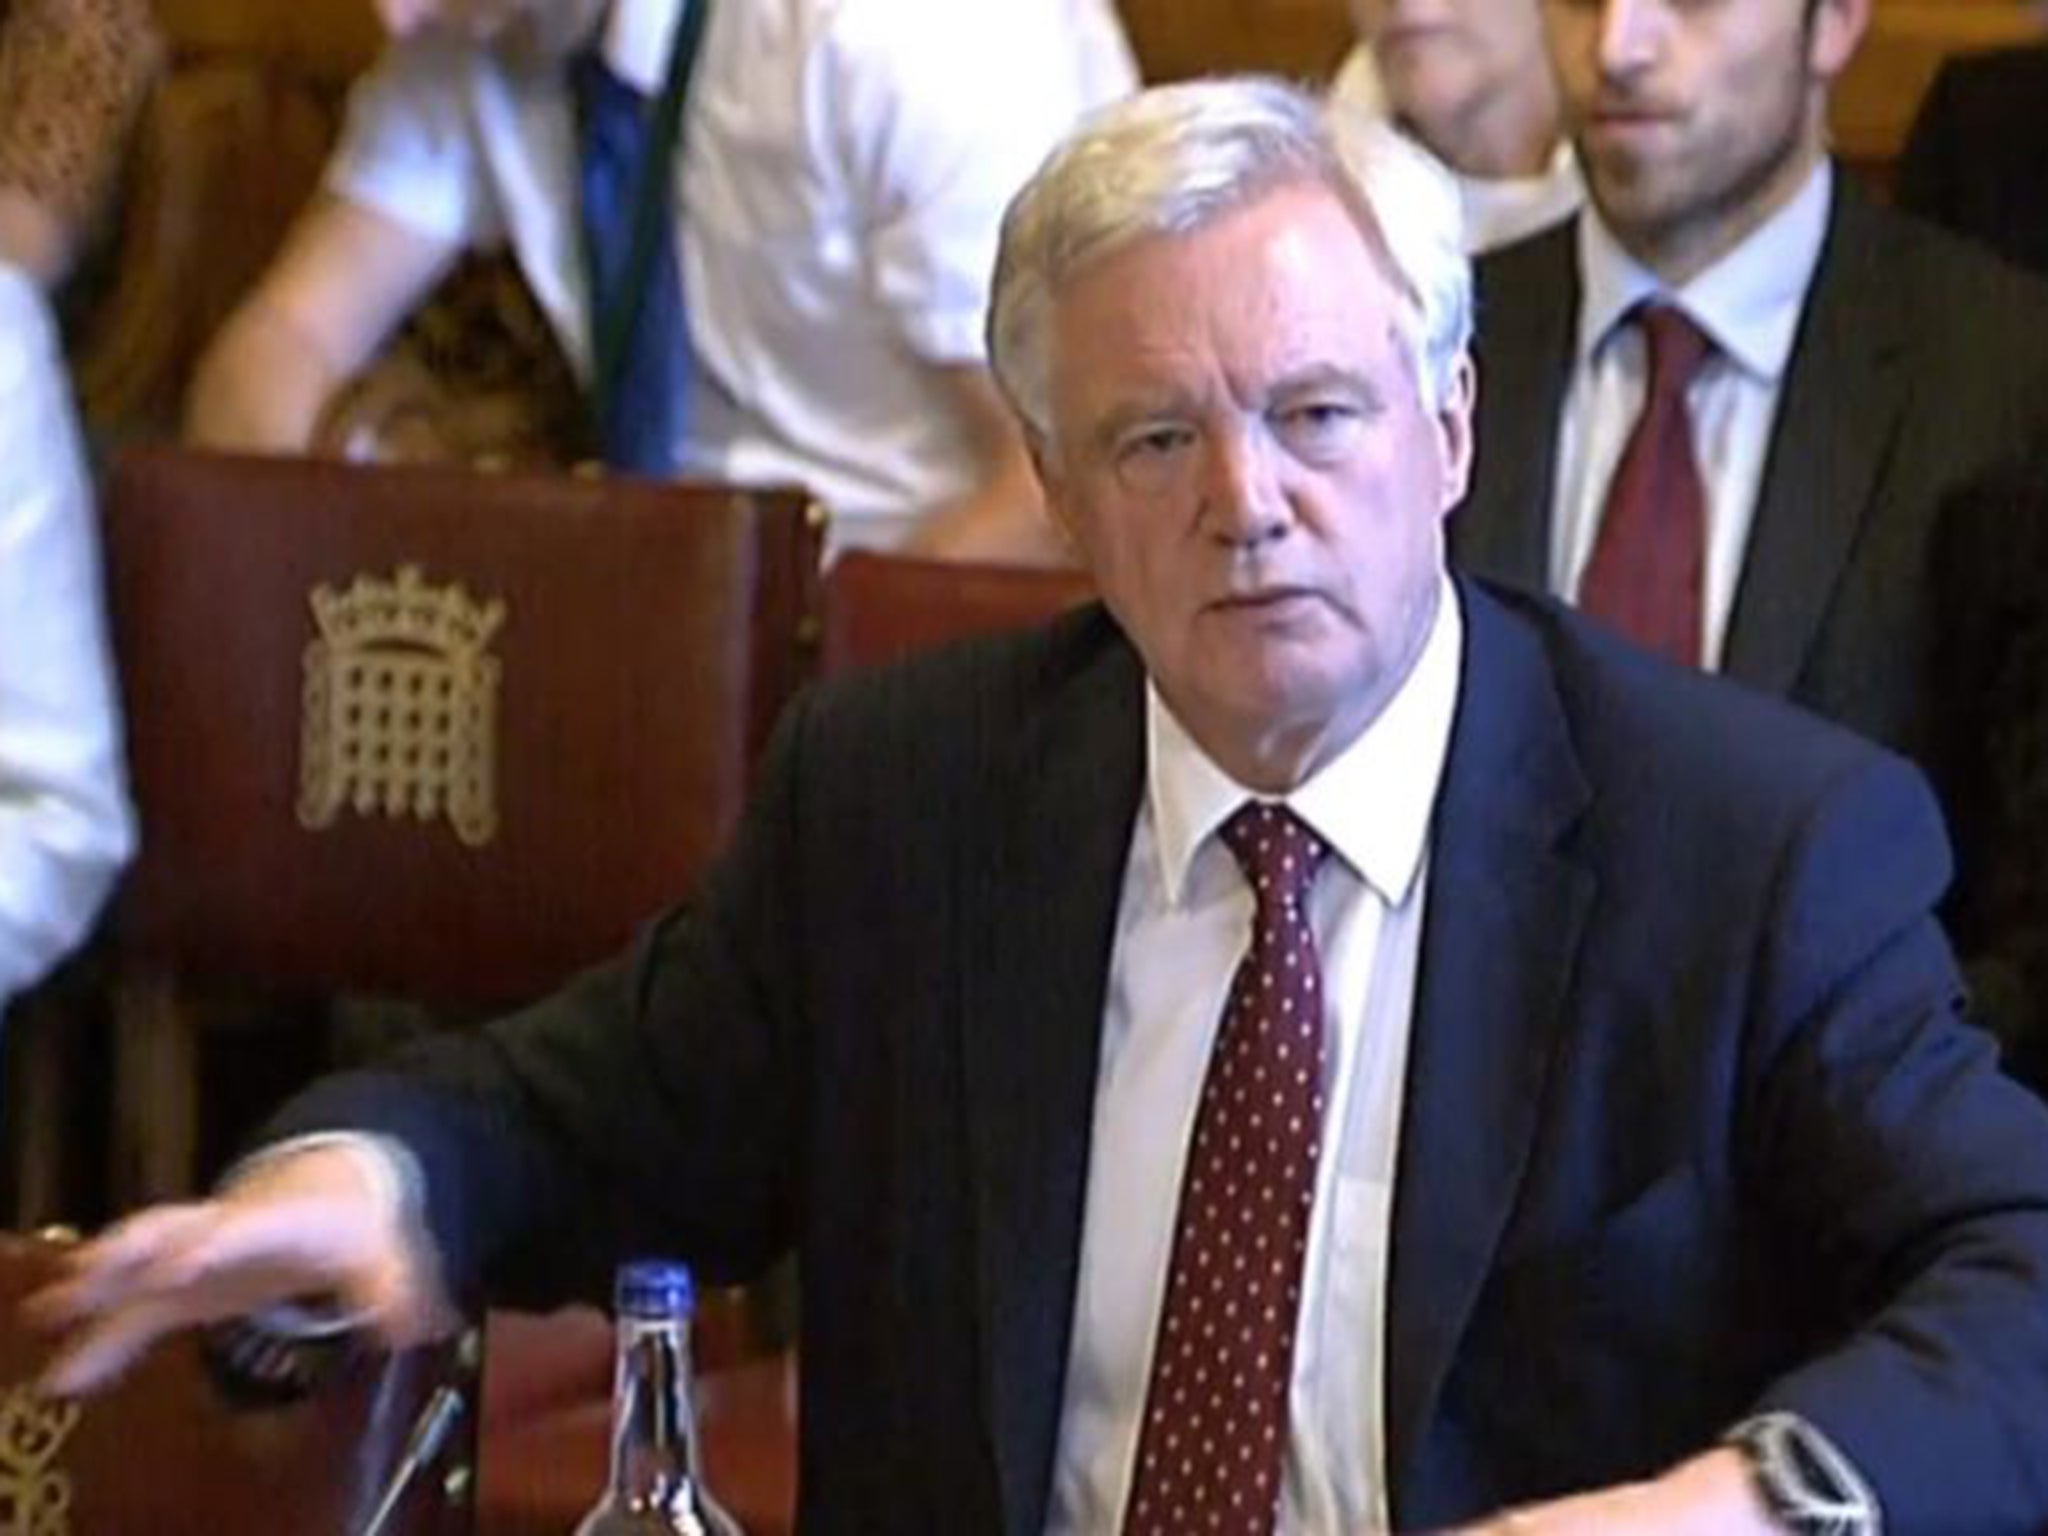 David Davis should think very carefully about what Parliament’s role should be in reaching a satisfactory Brexit settlement